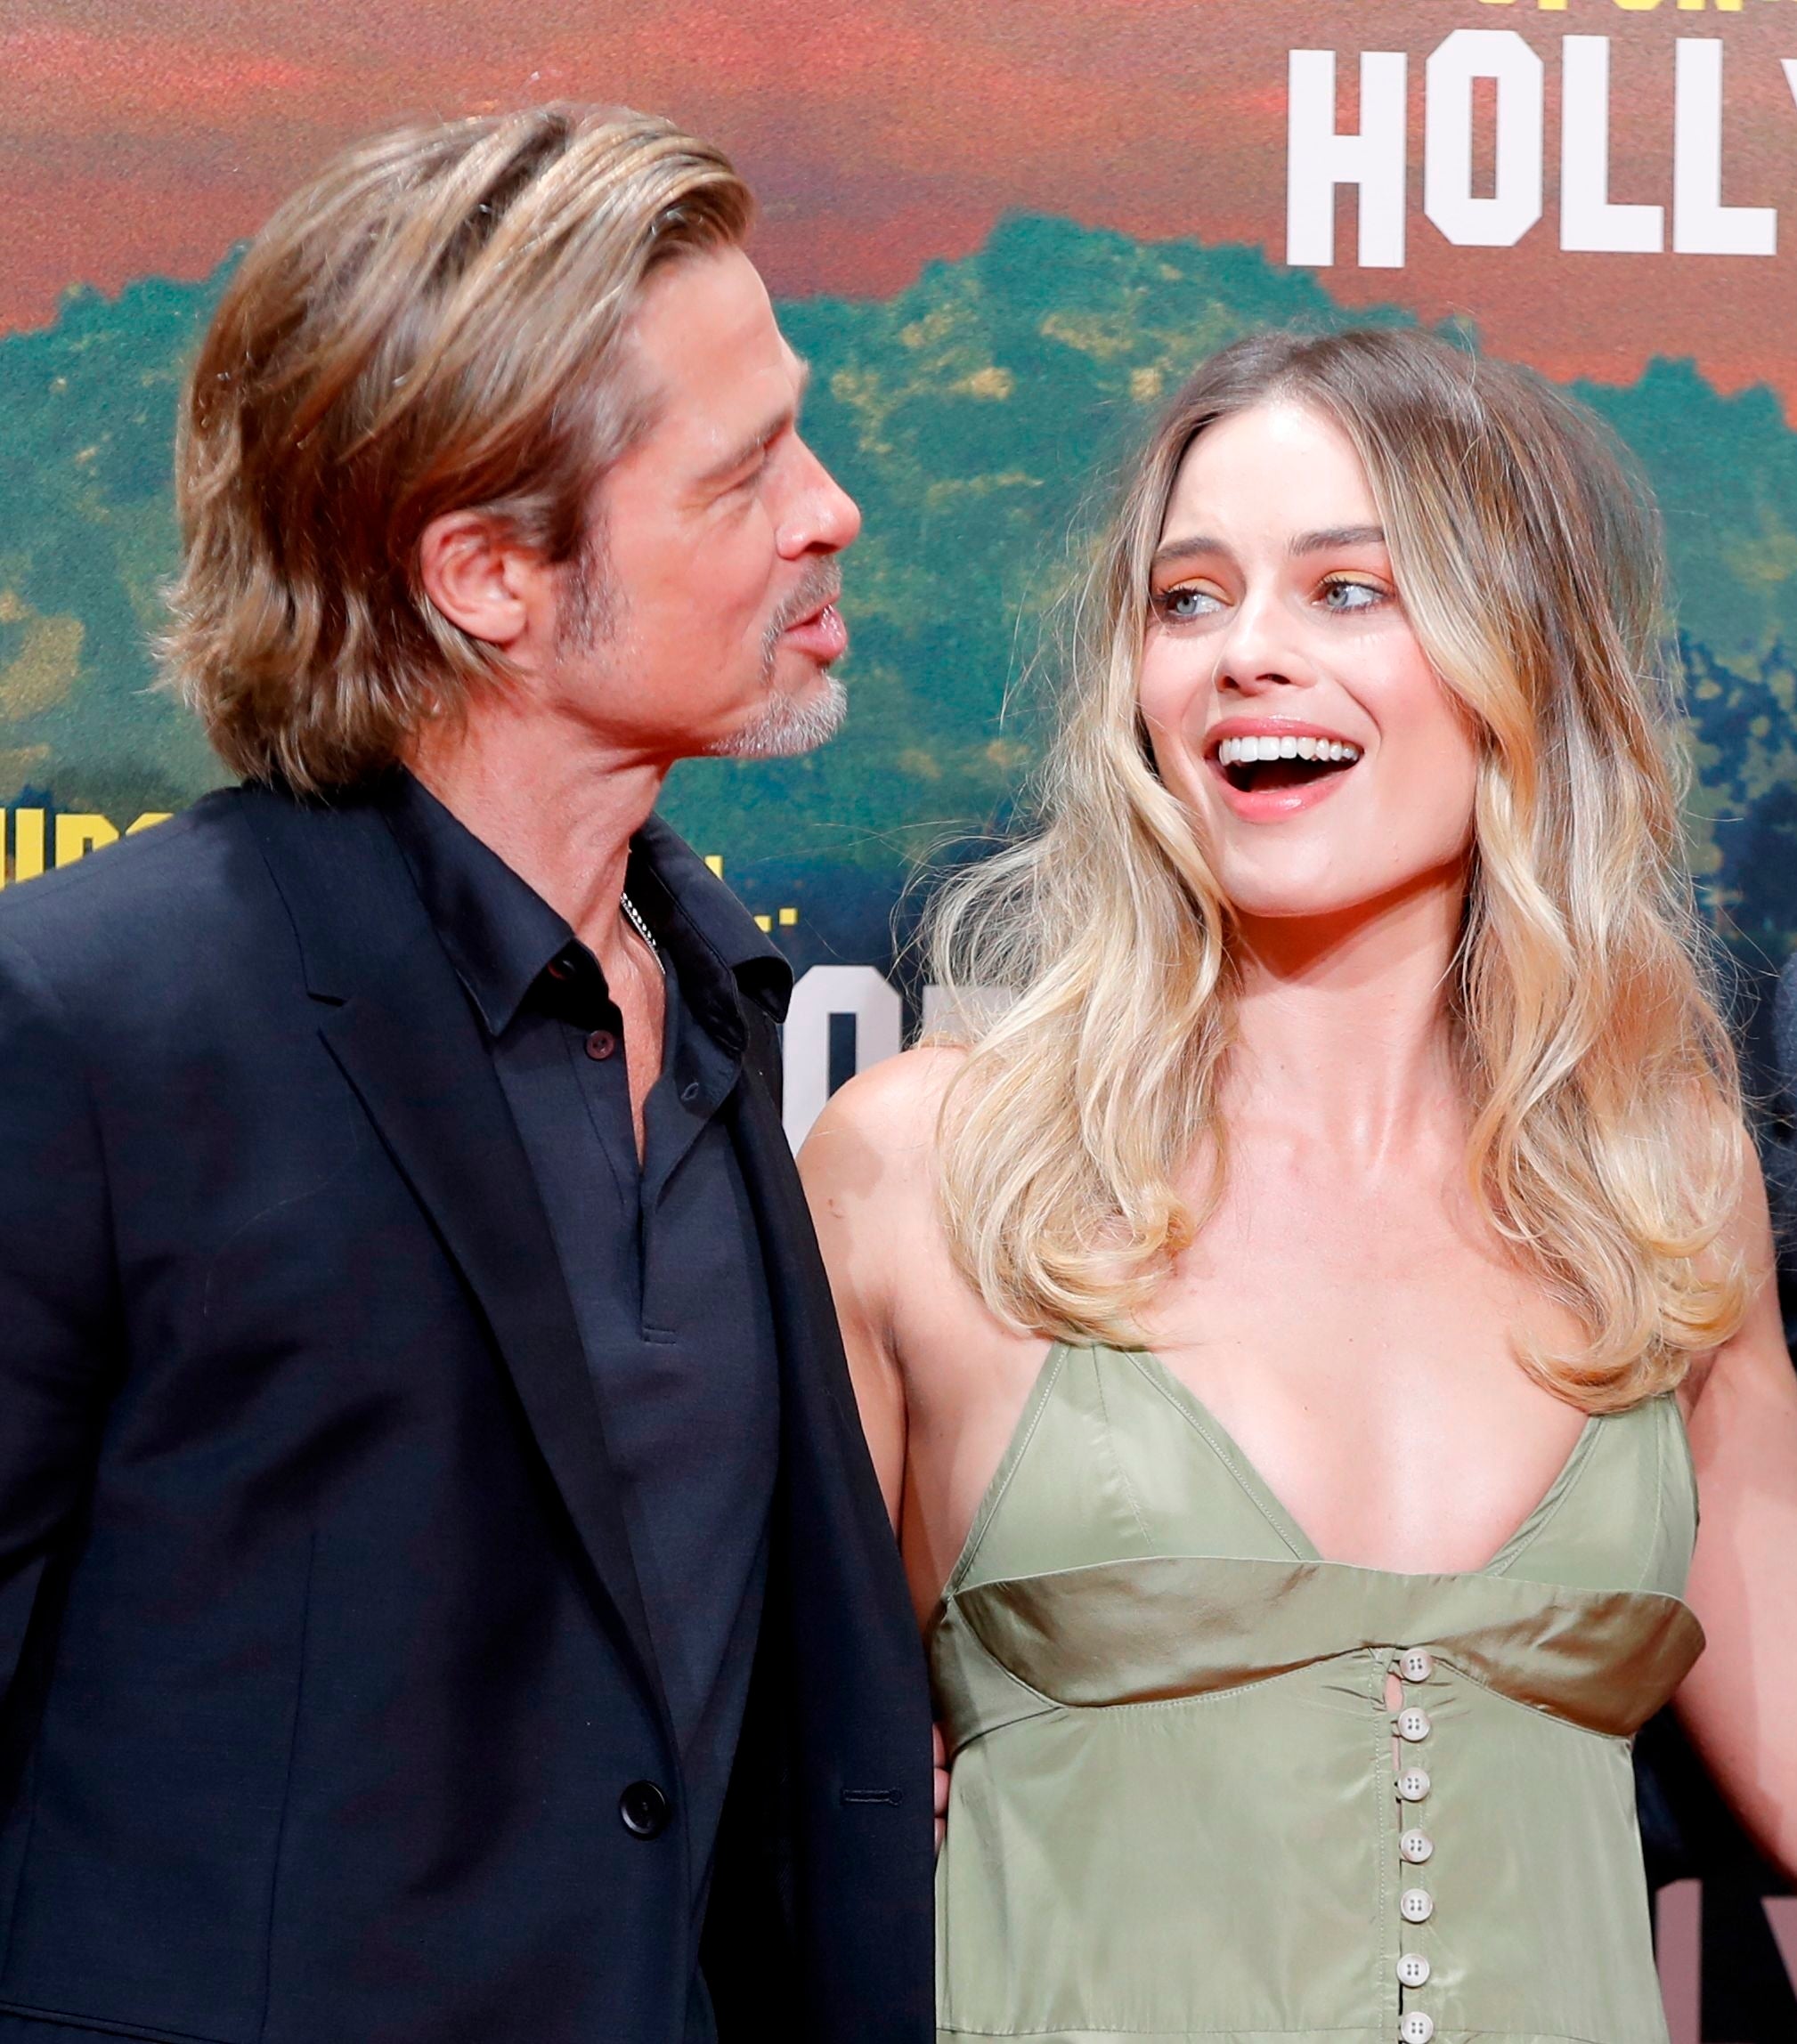 Brad and Margot at a media event